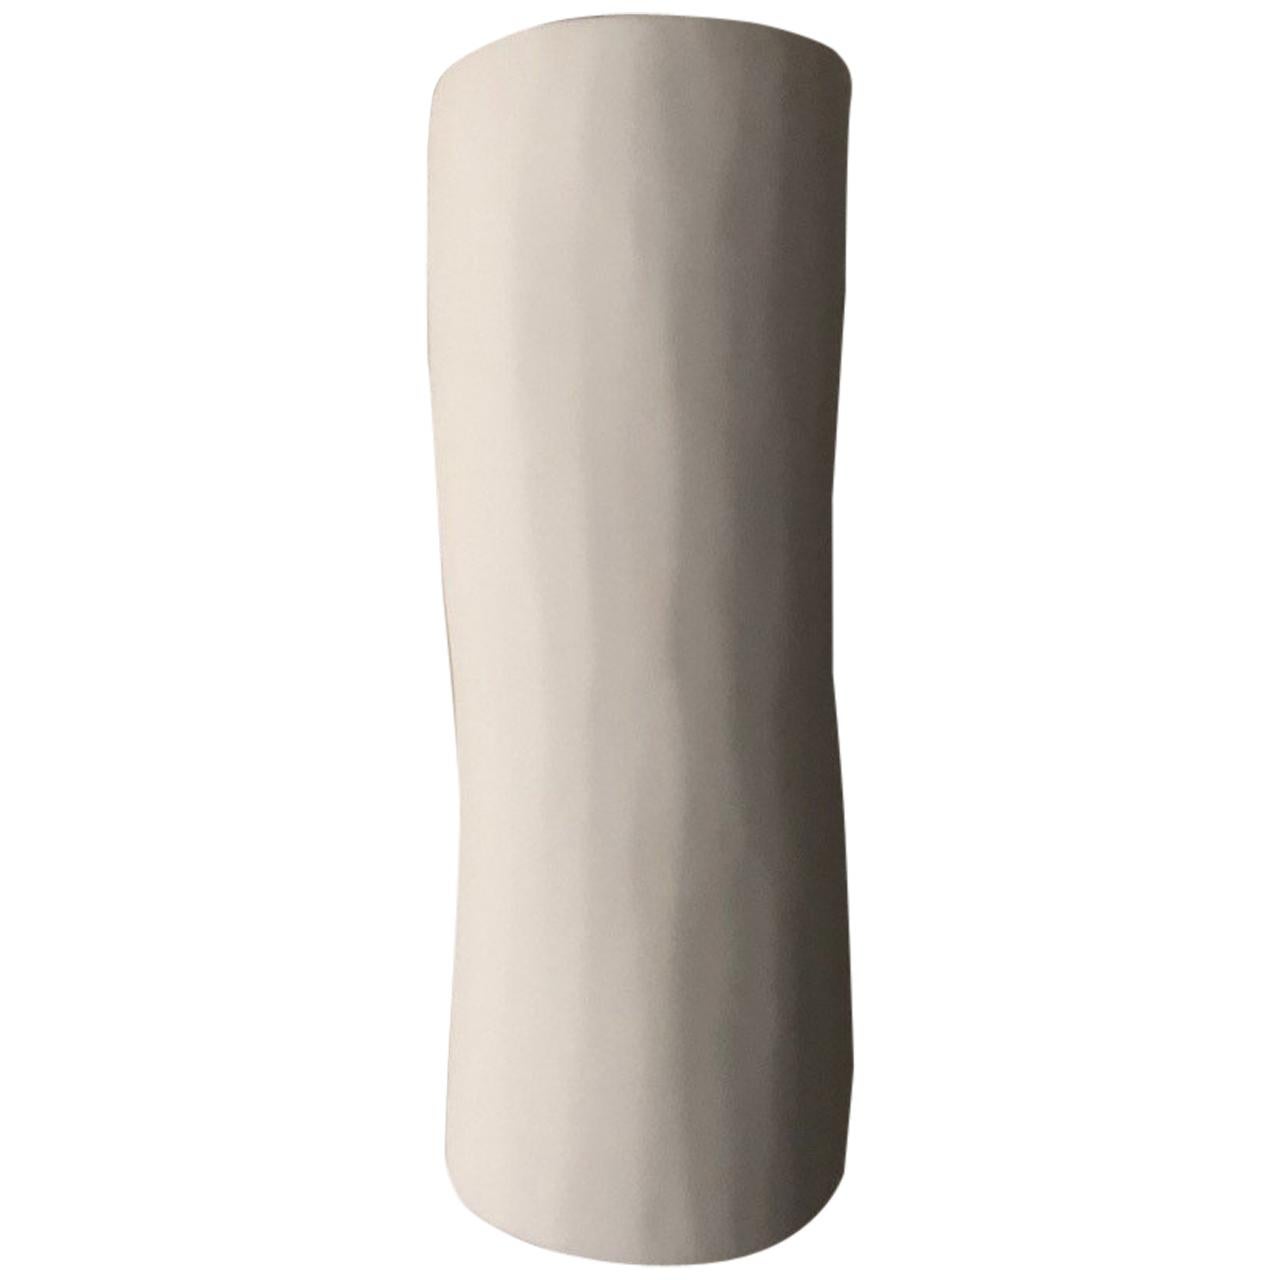 Serenity Contemporary Wall Sconce, Wall Light, White Plaster, Hannah Woodhouse